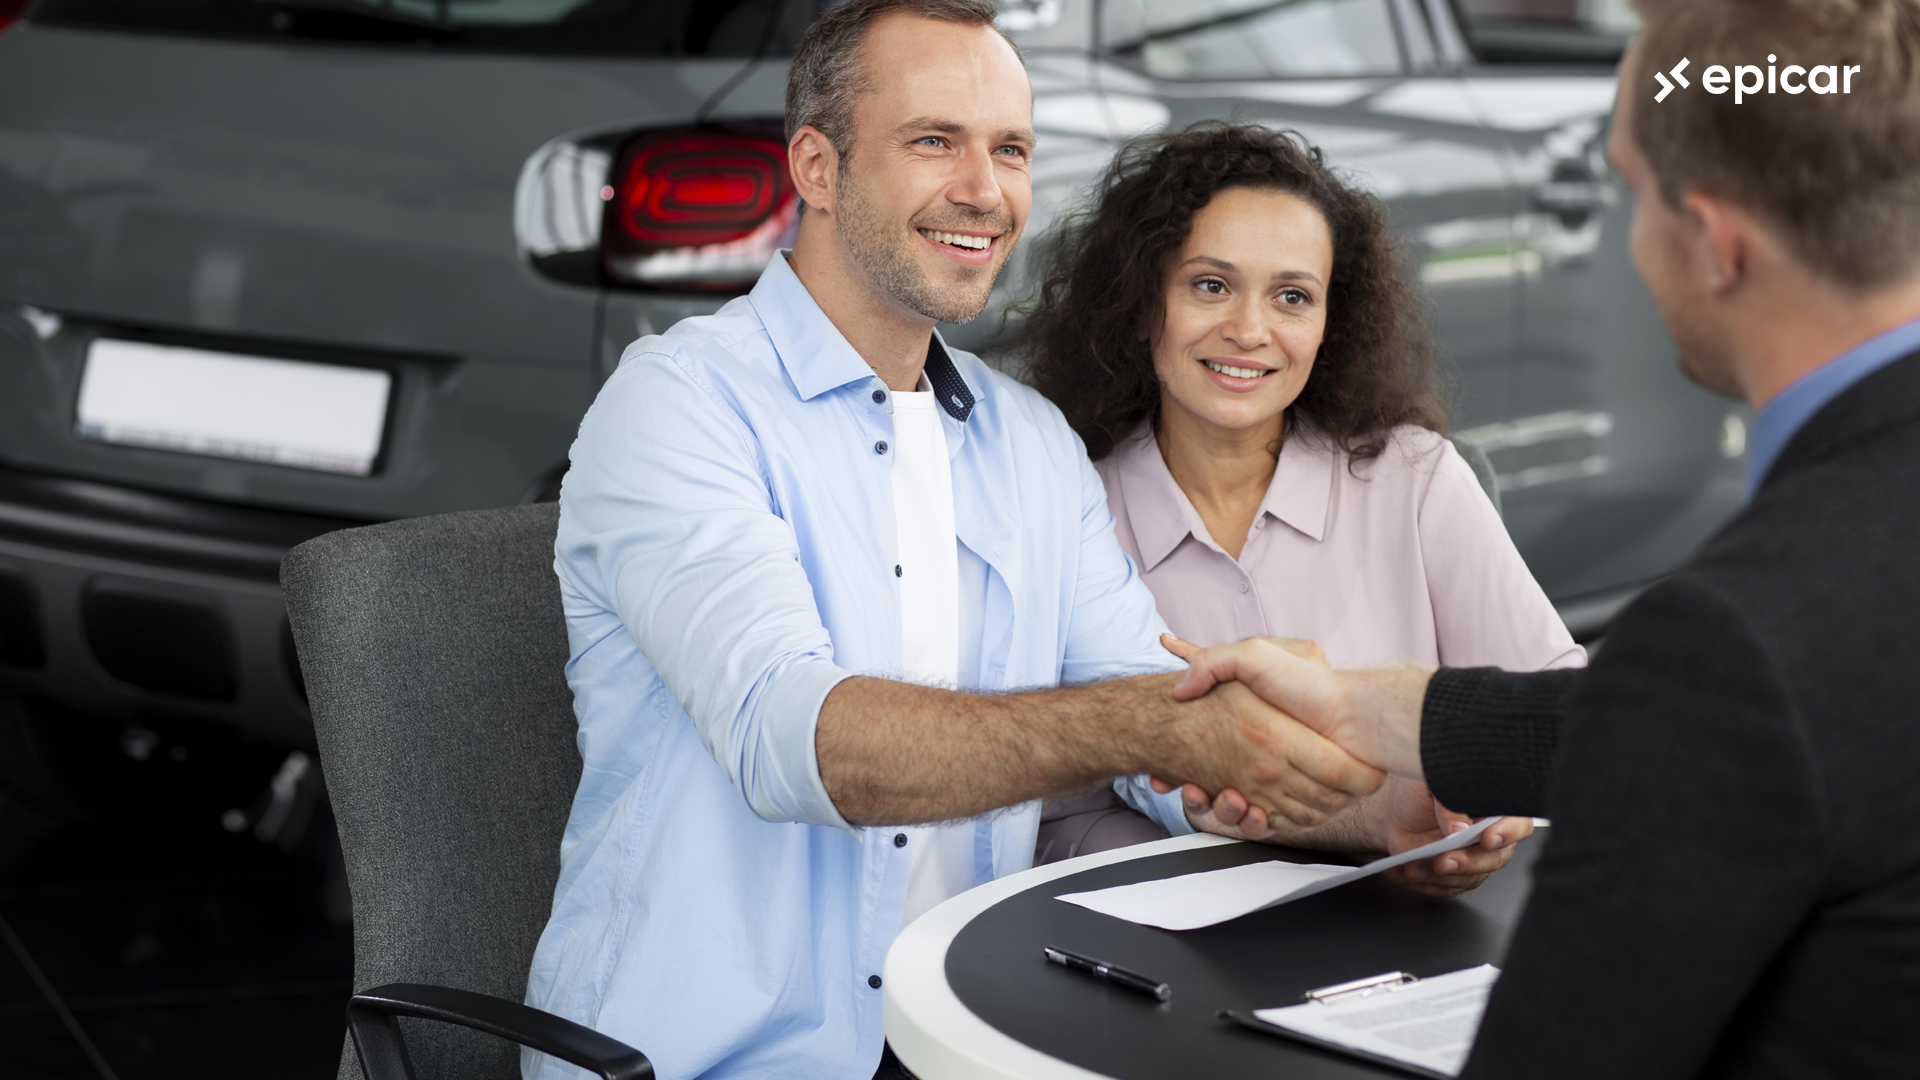 A seller and buyer exchanging paperwork with cash and a car in the background.